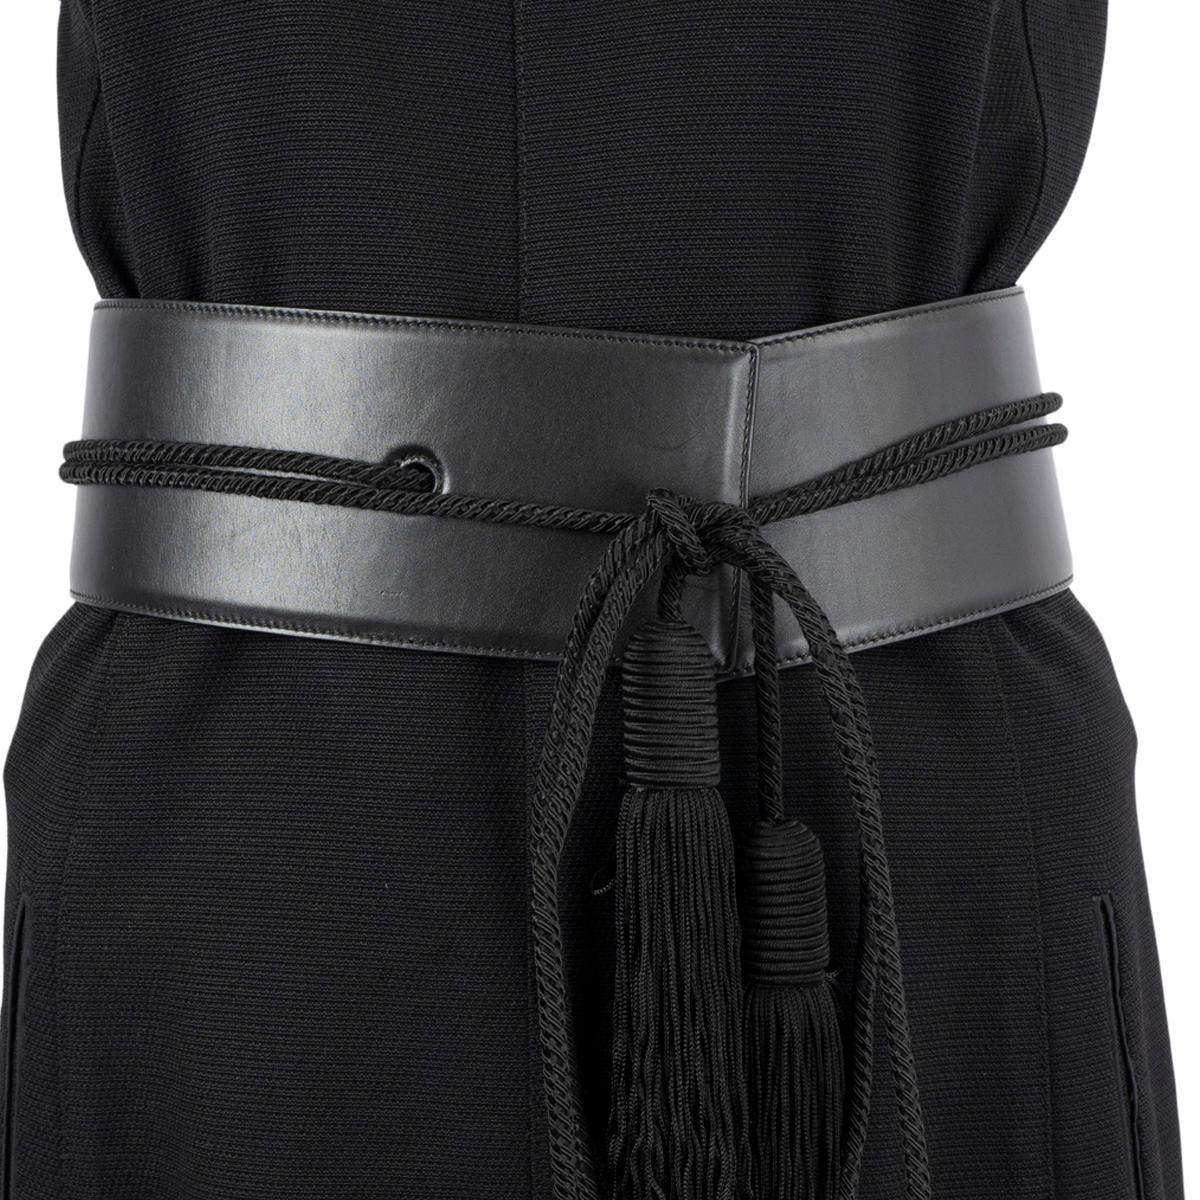 100% authentic Saint Laurent wrap waist belt in smooth black leather with self-tie tasselled cord. Has been worn and is in excellent condition. Comes with dust bag. 

Measurements
Model	321105 501523
Tag Size	M
Size	M
Width	7.5cm (2.9in)
Length	74cm